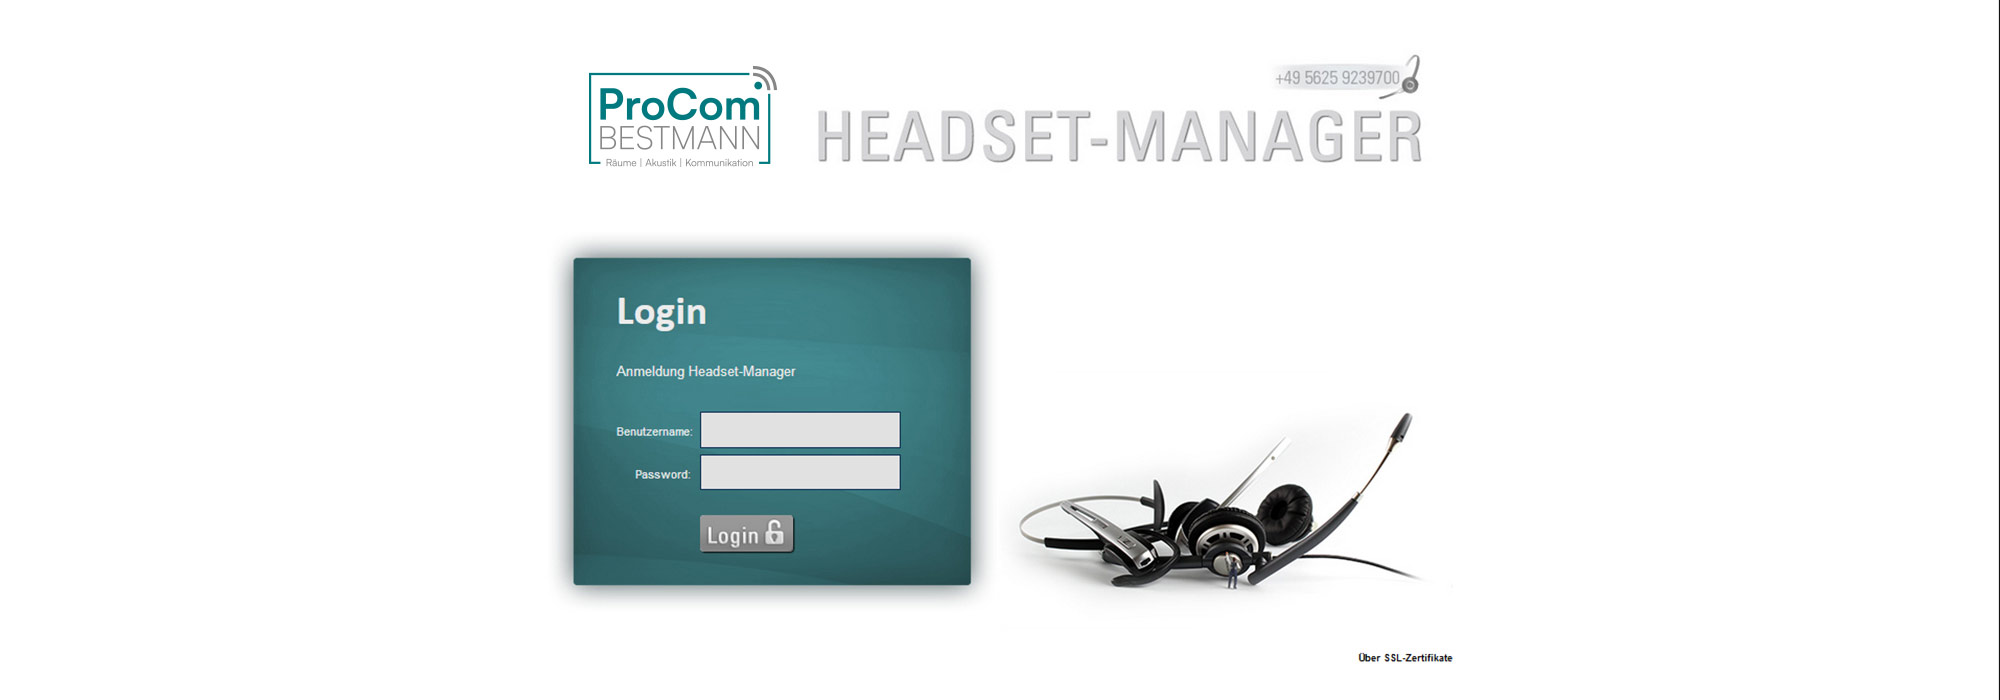 Headset-Manager